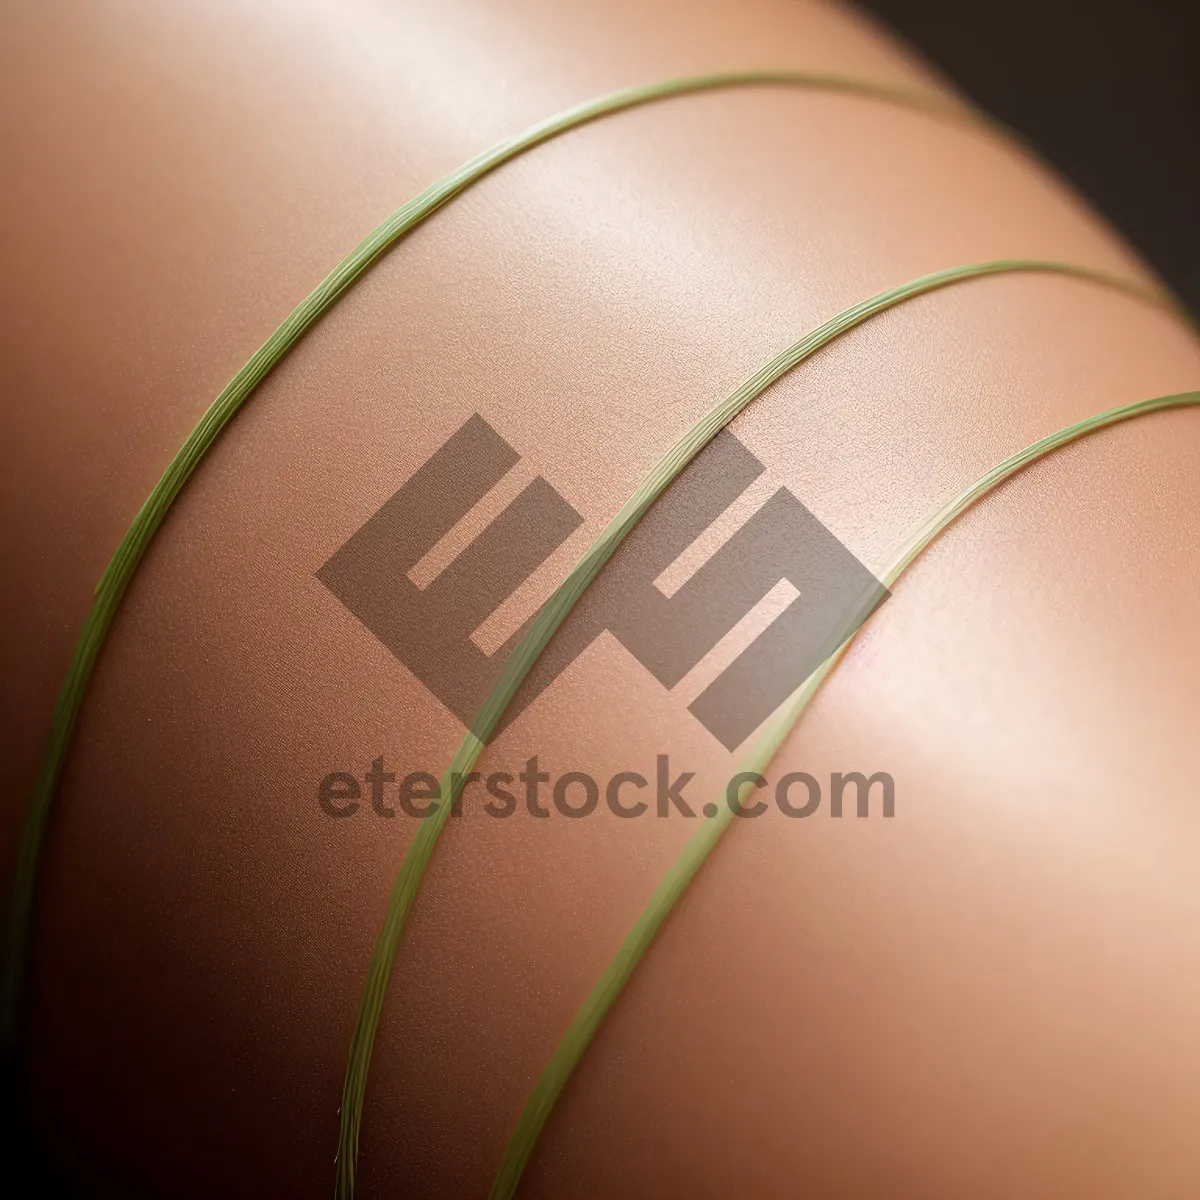 Picture of Curved Line Graphic Art with Light and Shade